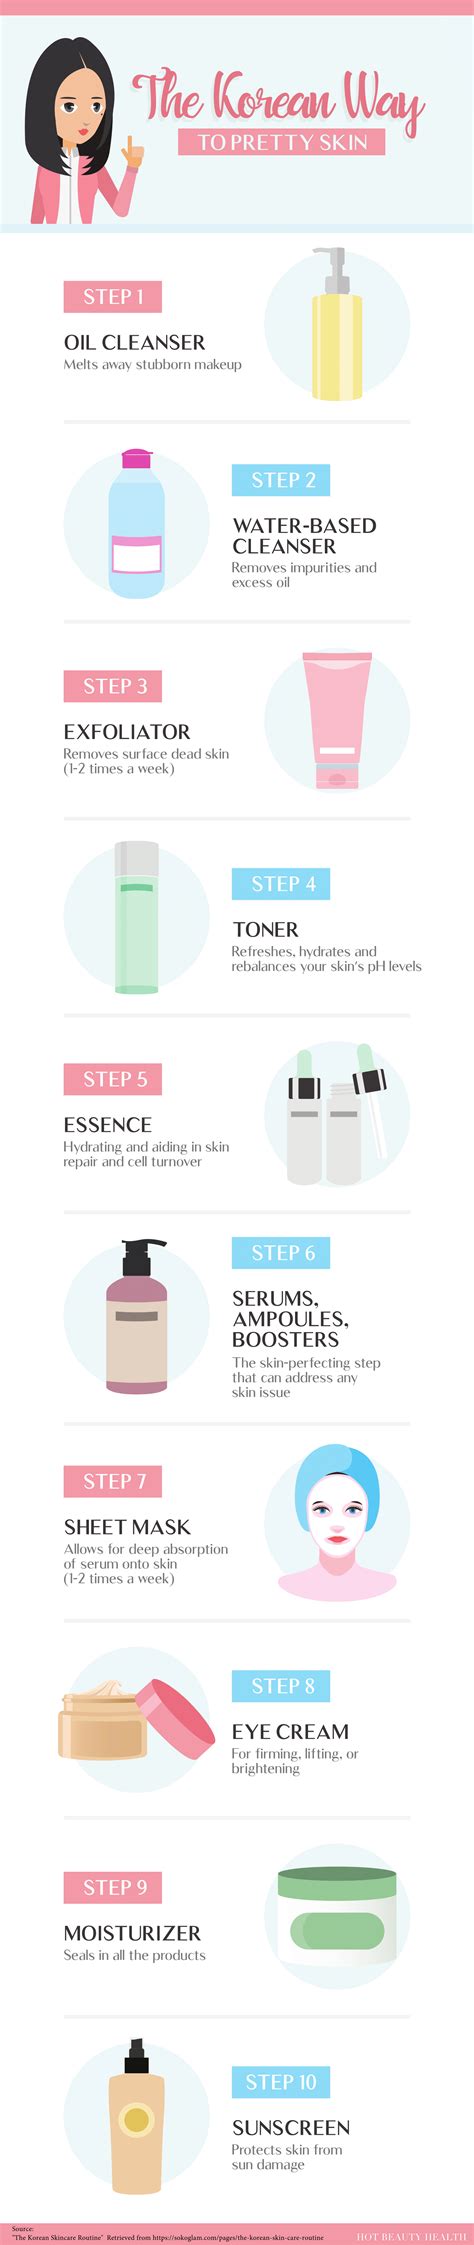 The 10 Step Korean Skincare Routine Infographic Hot